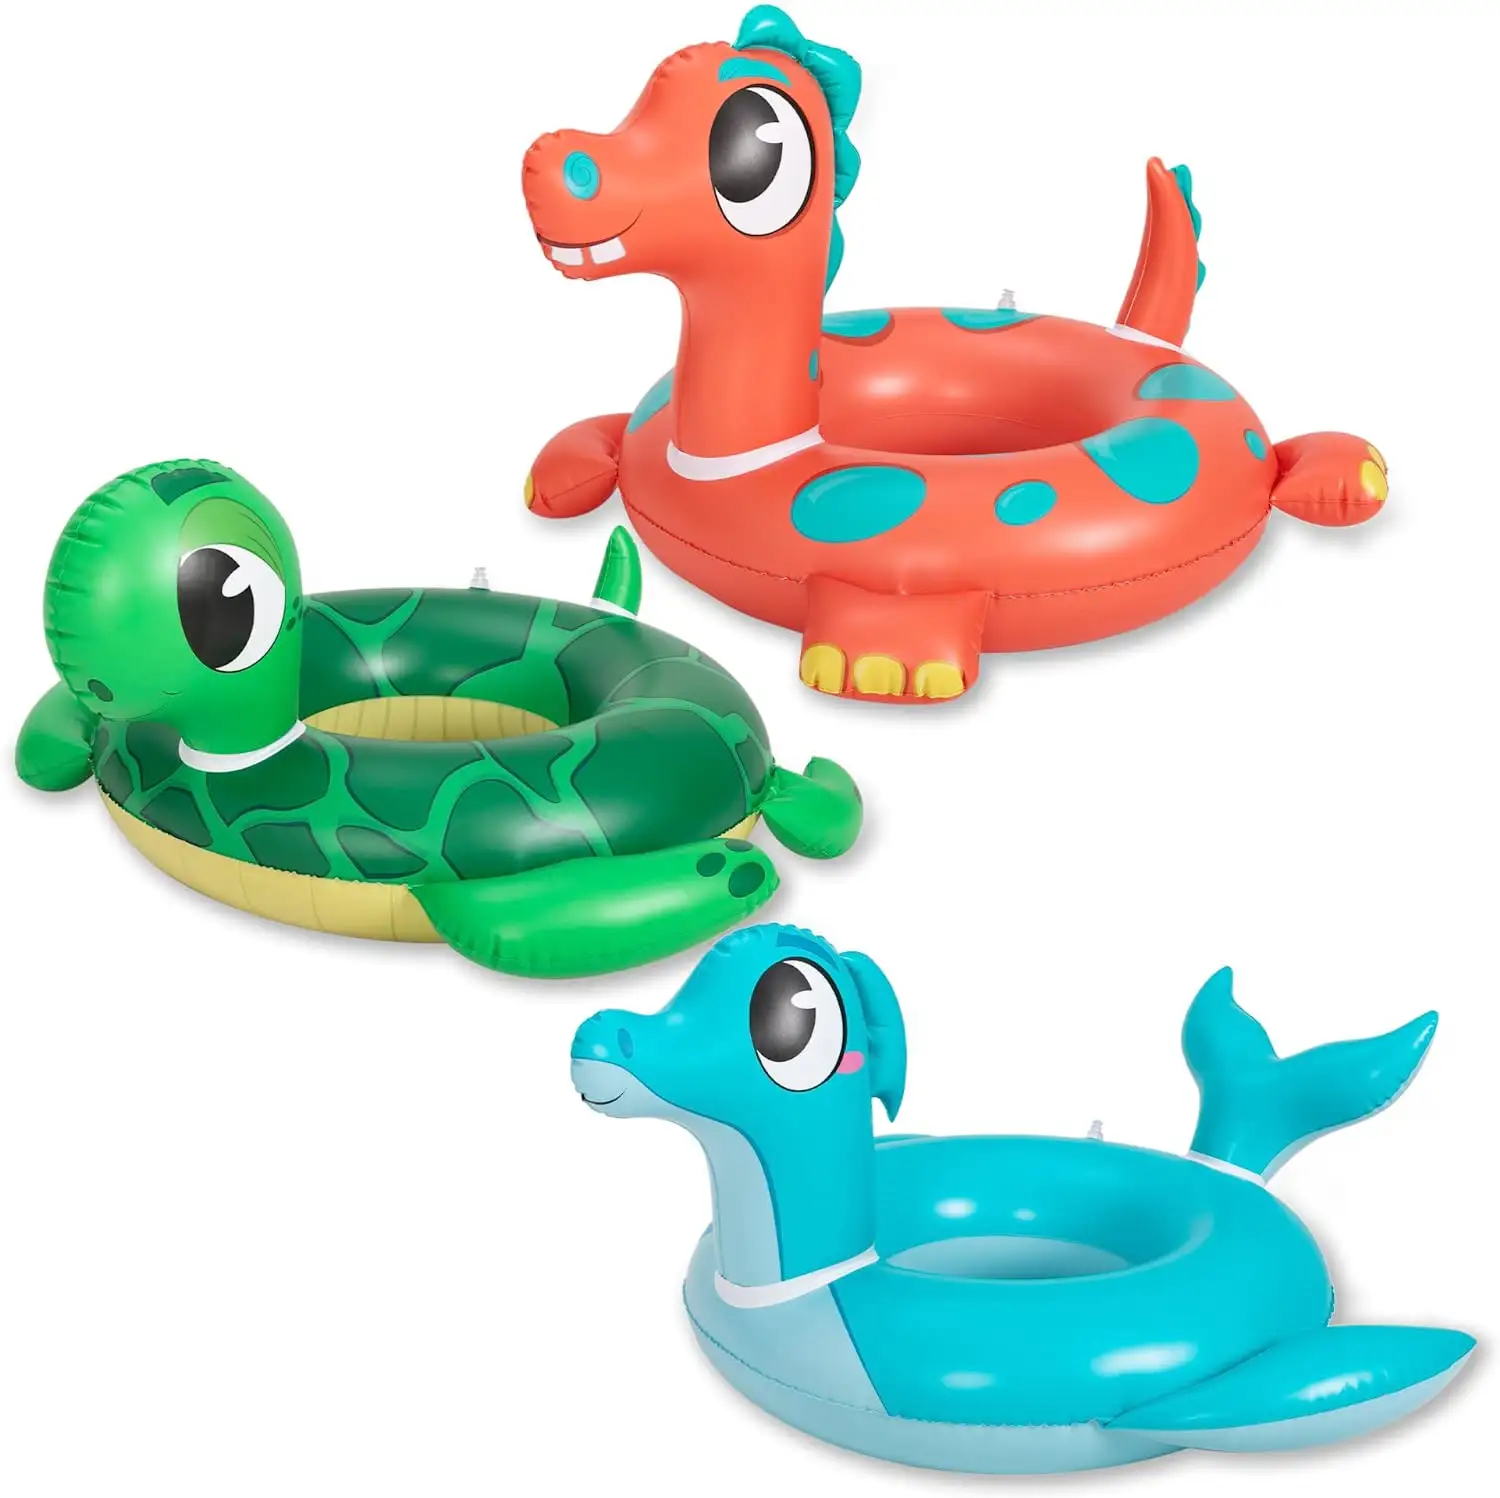 Inflatable Pool Tubes Floats Dinosaur Sea Turtle Animal Swim Ring in Pool Beach Summer Float Party Outdoor